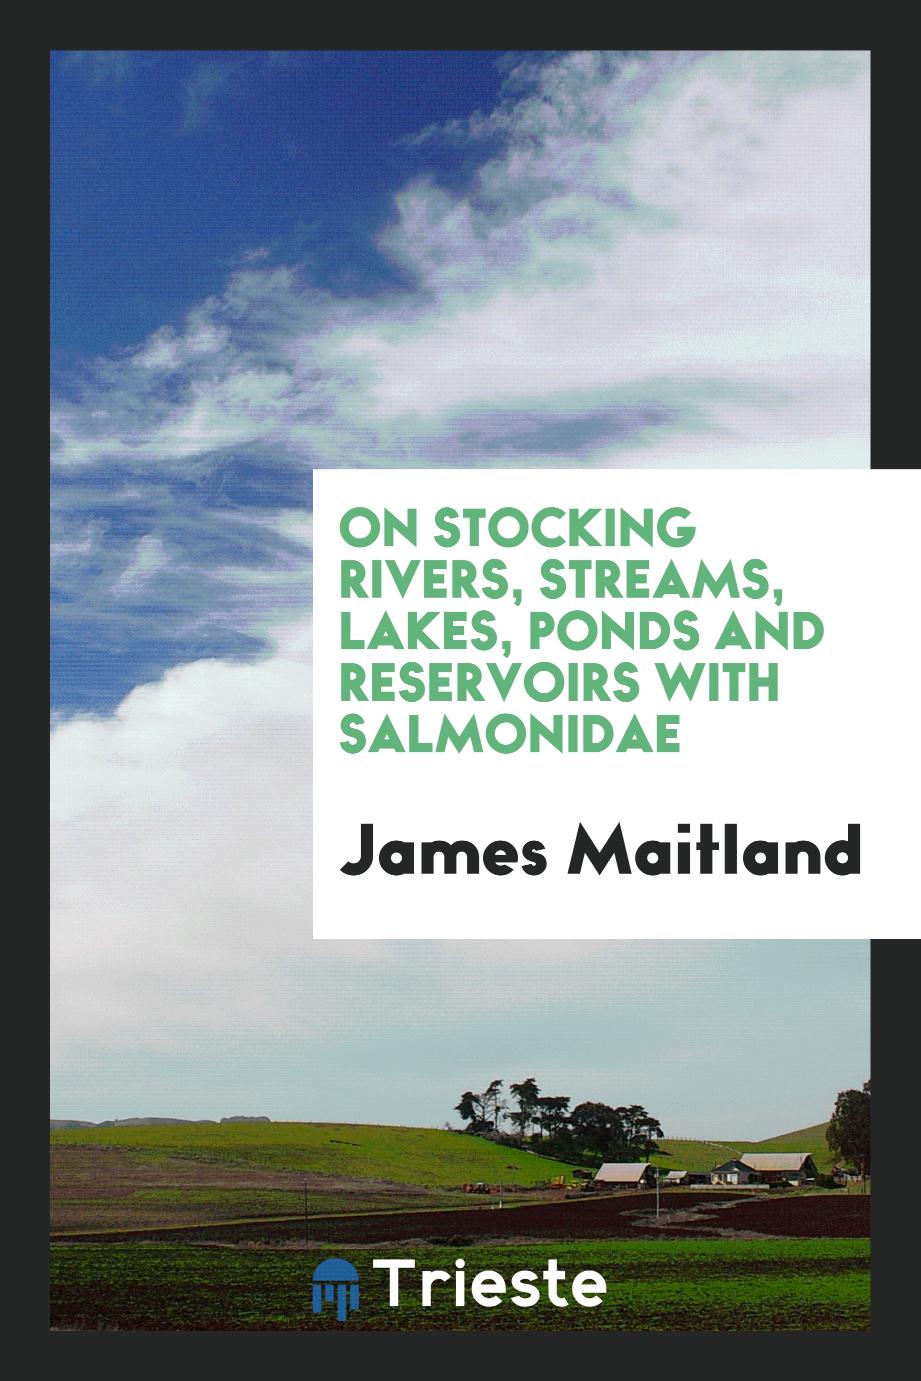 On Stocking Rivers, Streams, Lakes, Ponds and Reservoirs with Salmonidae